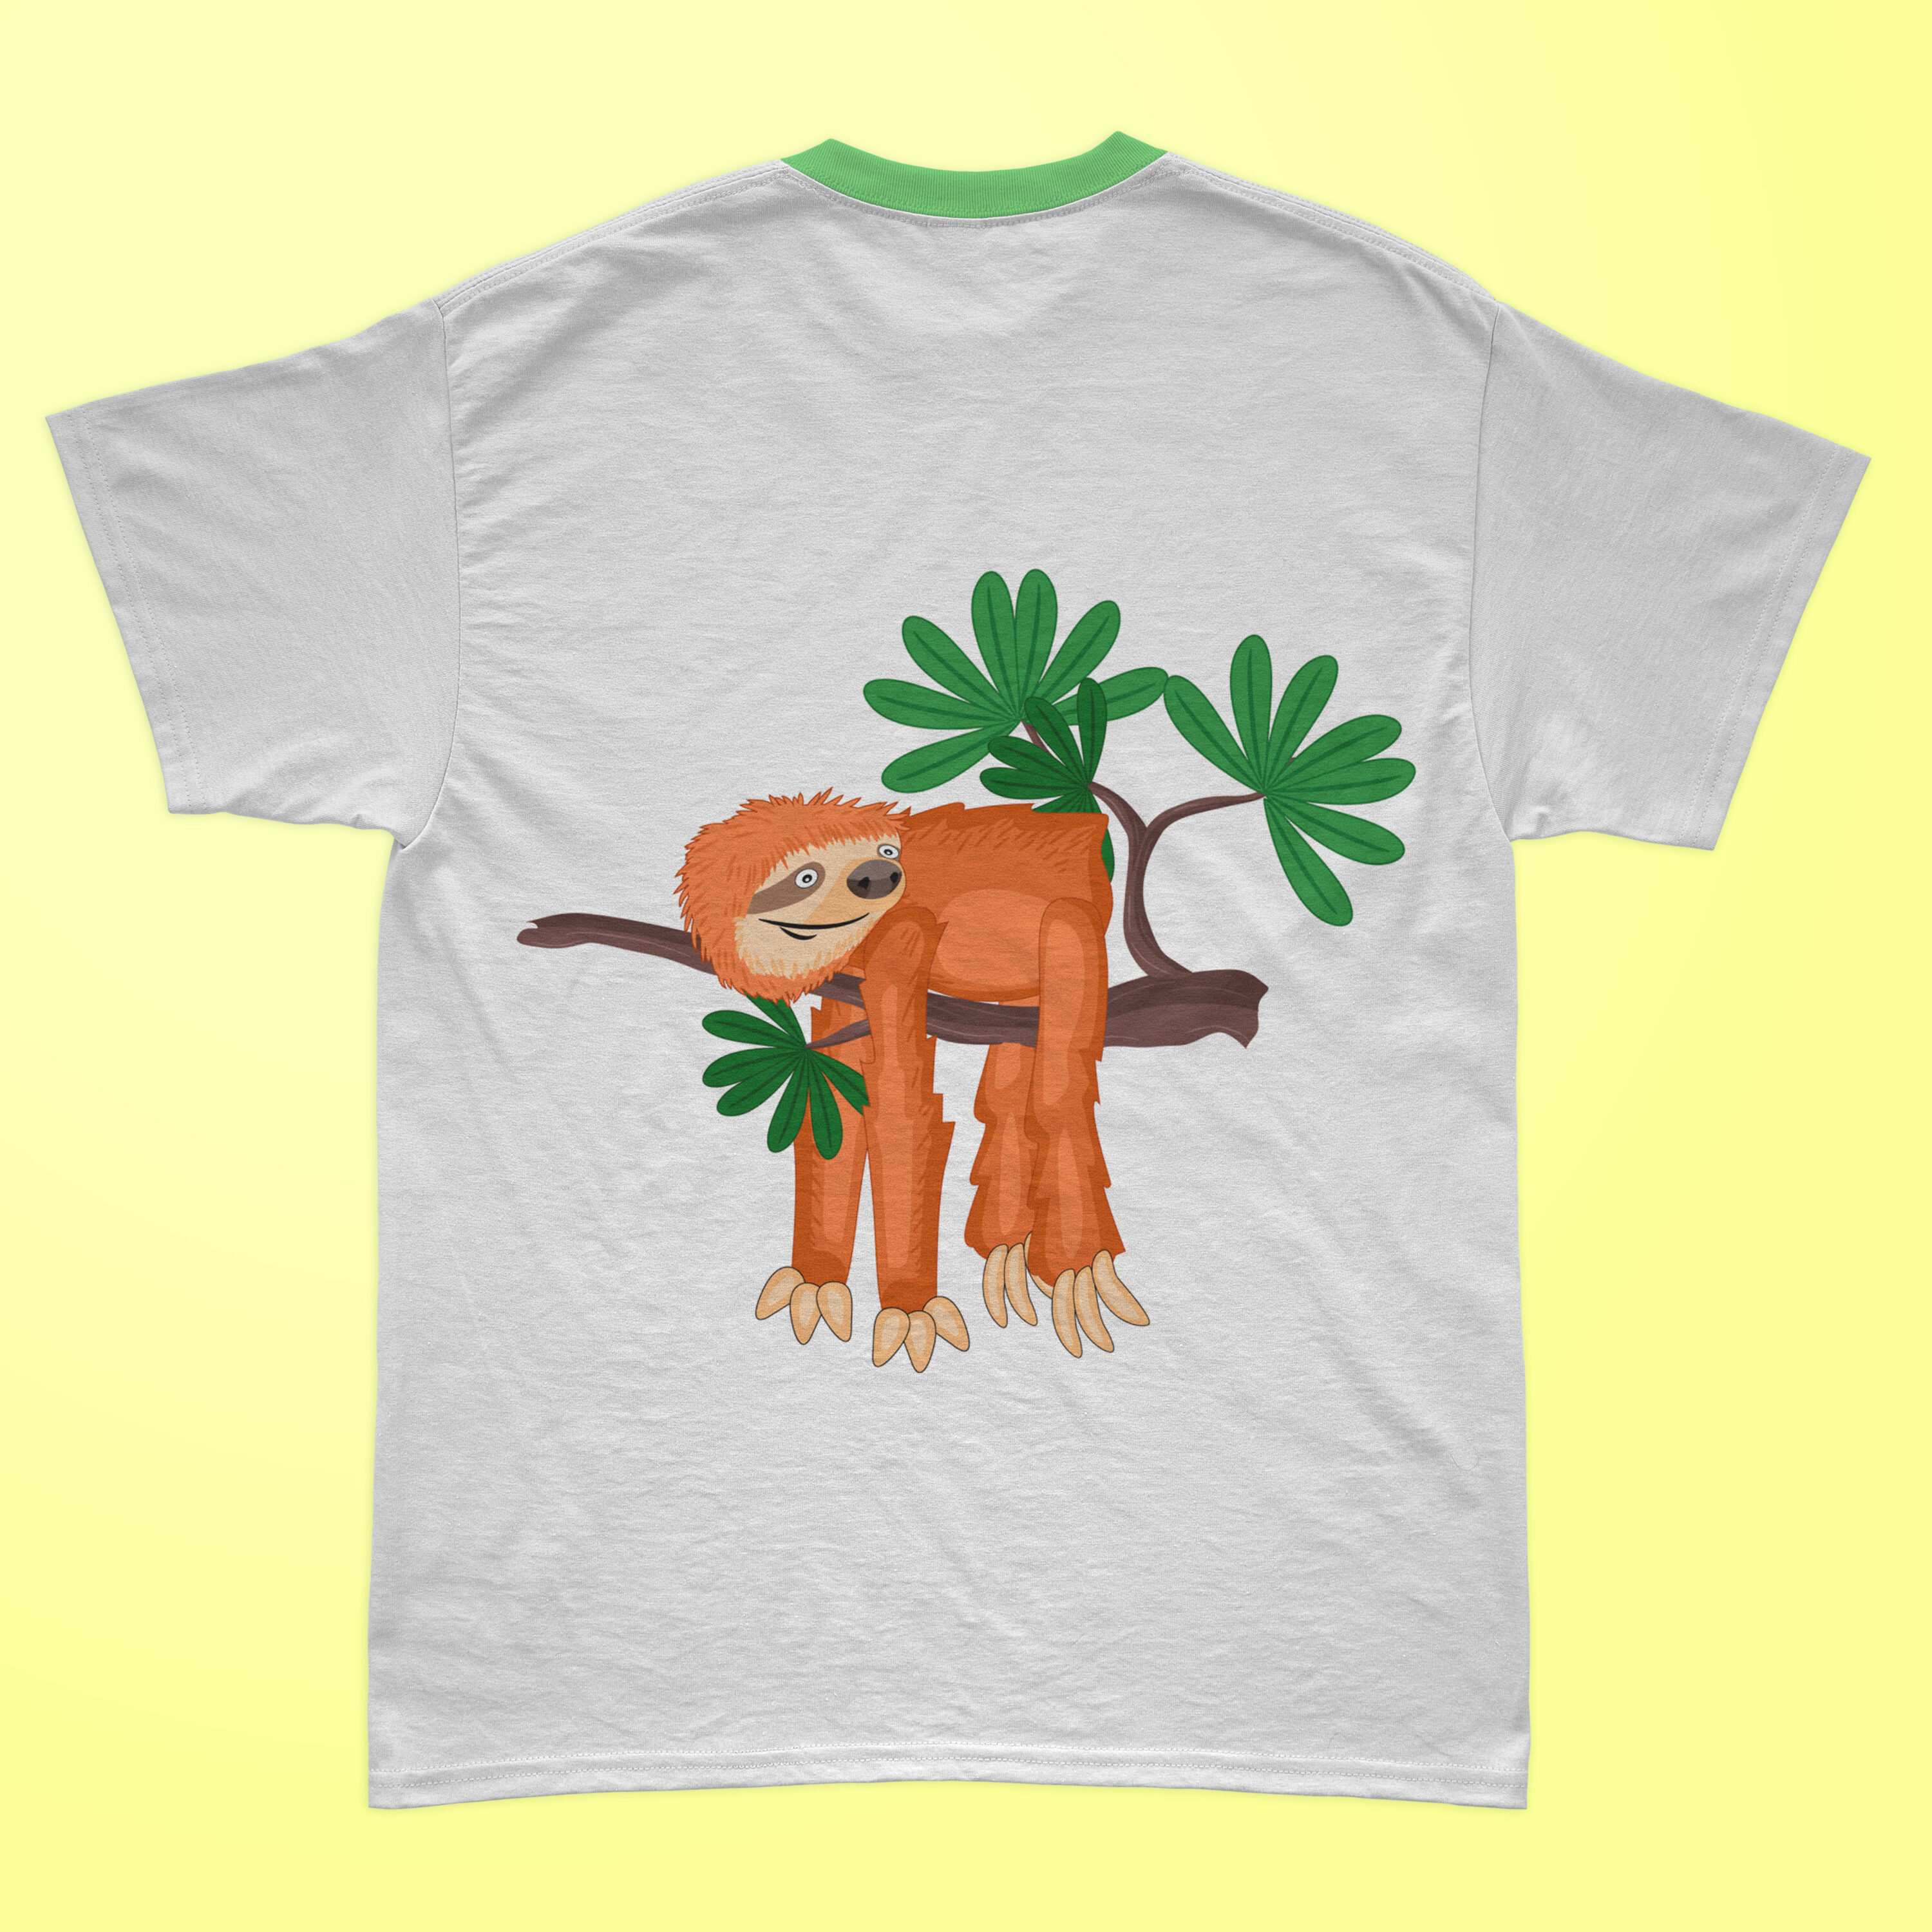 mage of a white t-shirt with an exquisite print of a sloth lying on a tree.